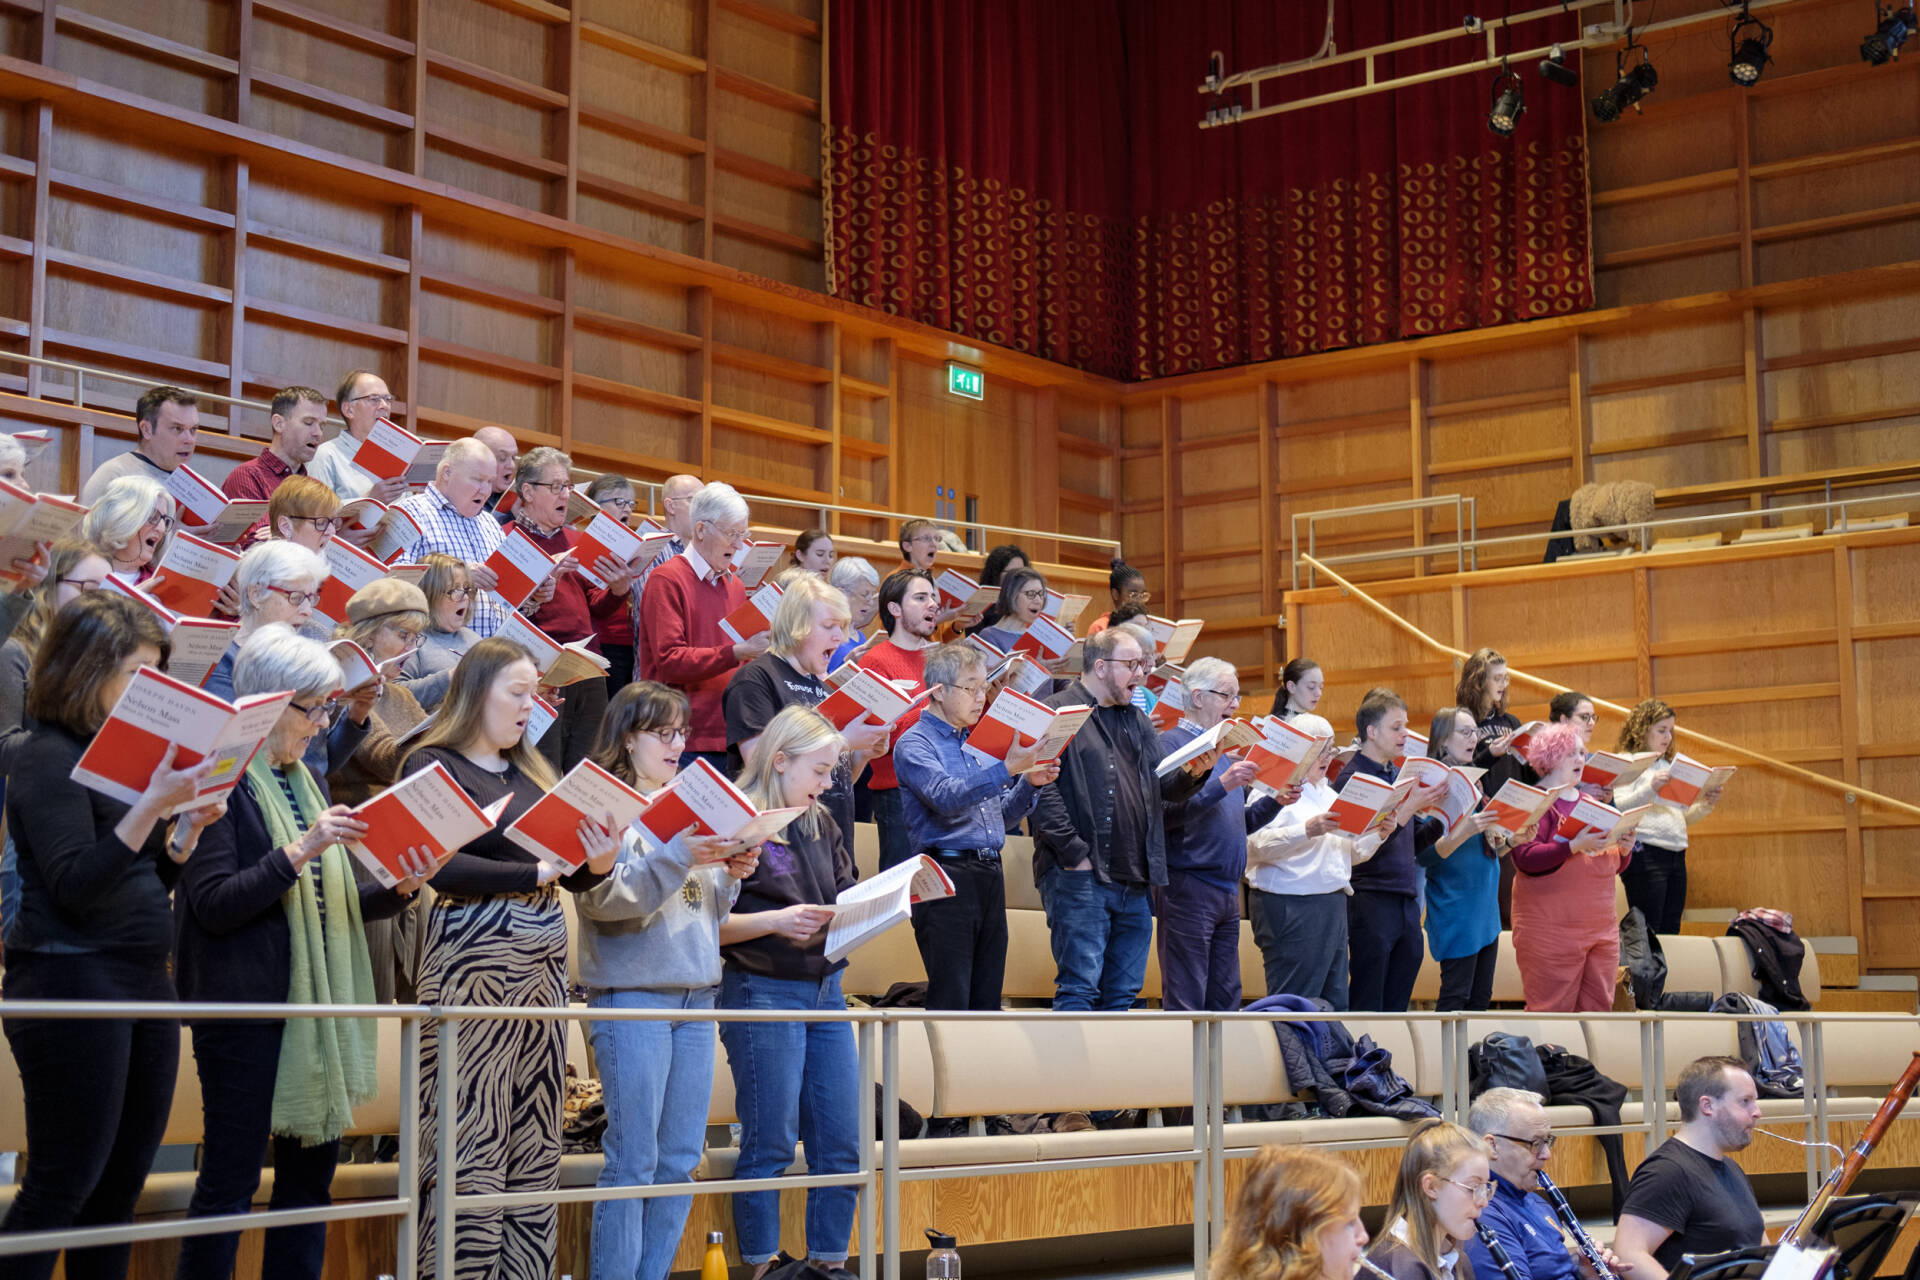 Group of singers on tiered seating in rehearsal in a concert-hall